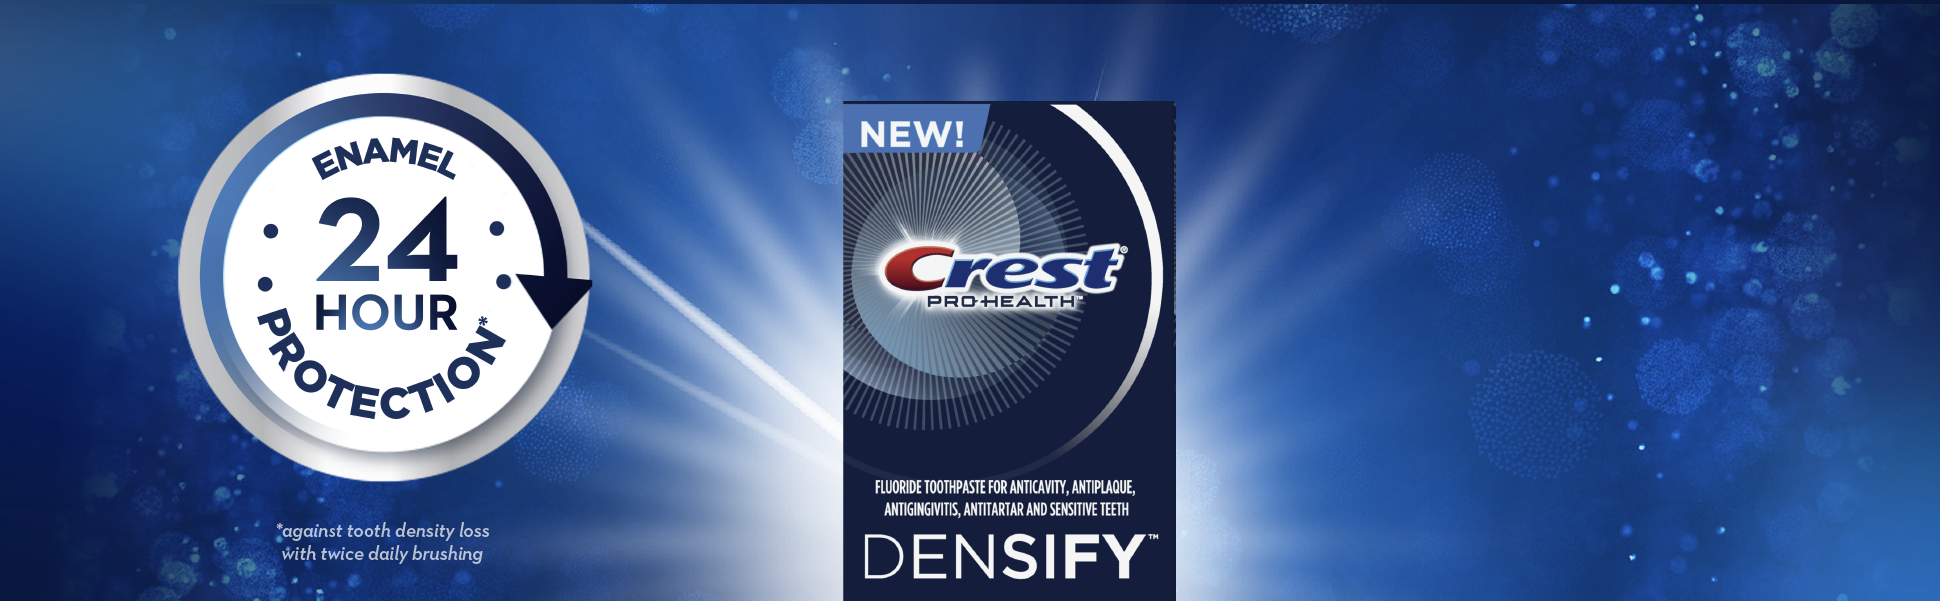 CREST PRO-HEALTH DENSIFY WHITENING TOOTHPASTE - Enhanced Content 2